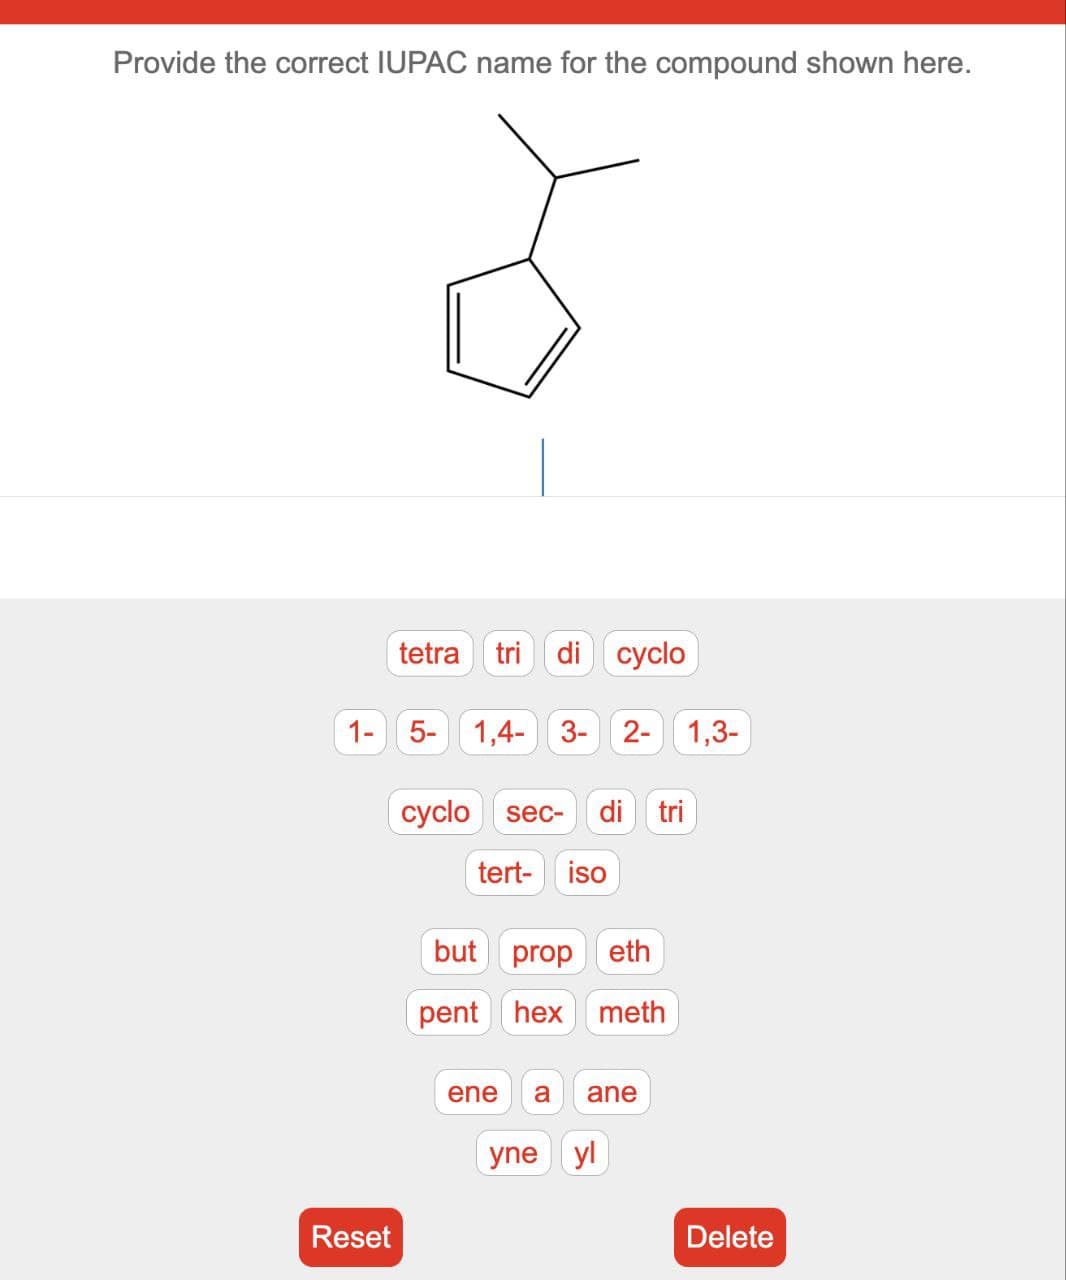 Provide the correct IUPAC name for the compound shown here.
tetra tri di cyclo
1- 5- 1,4- 3- 2- 1,3-
Reset
cyclo sec- di tri
tert- iso
but prop eth
pent hex meth
ene a ane
yne yl
Delete